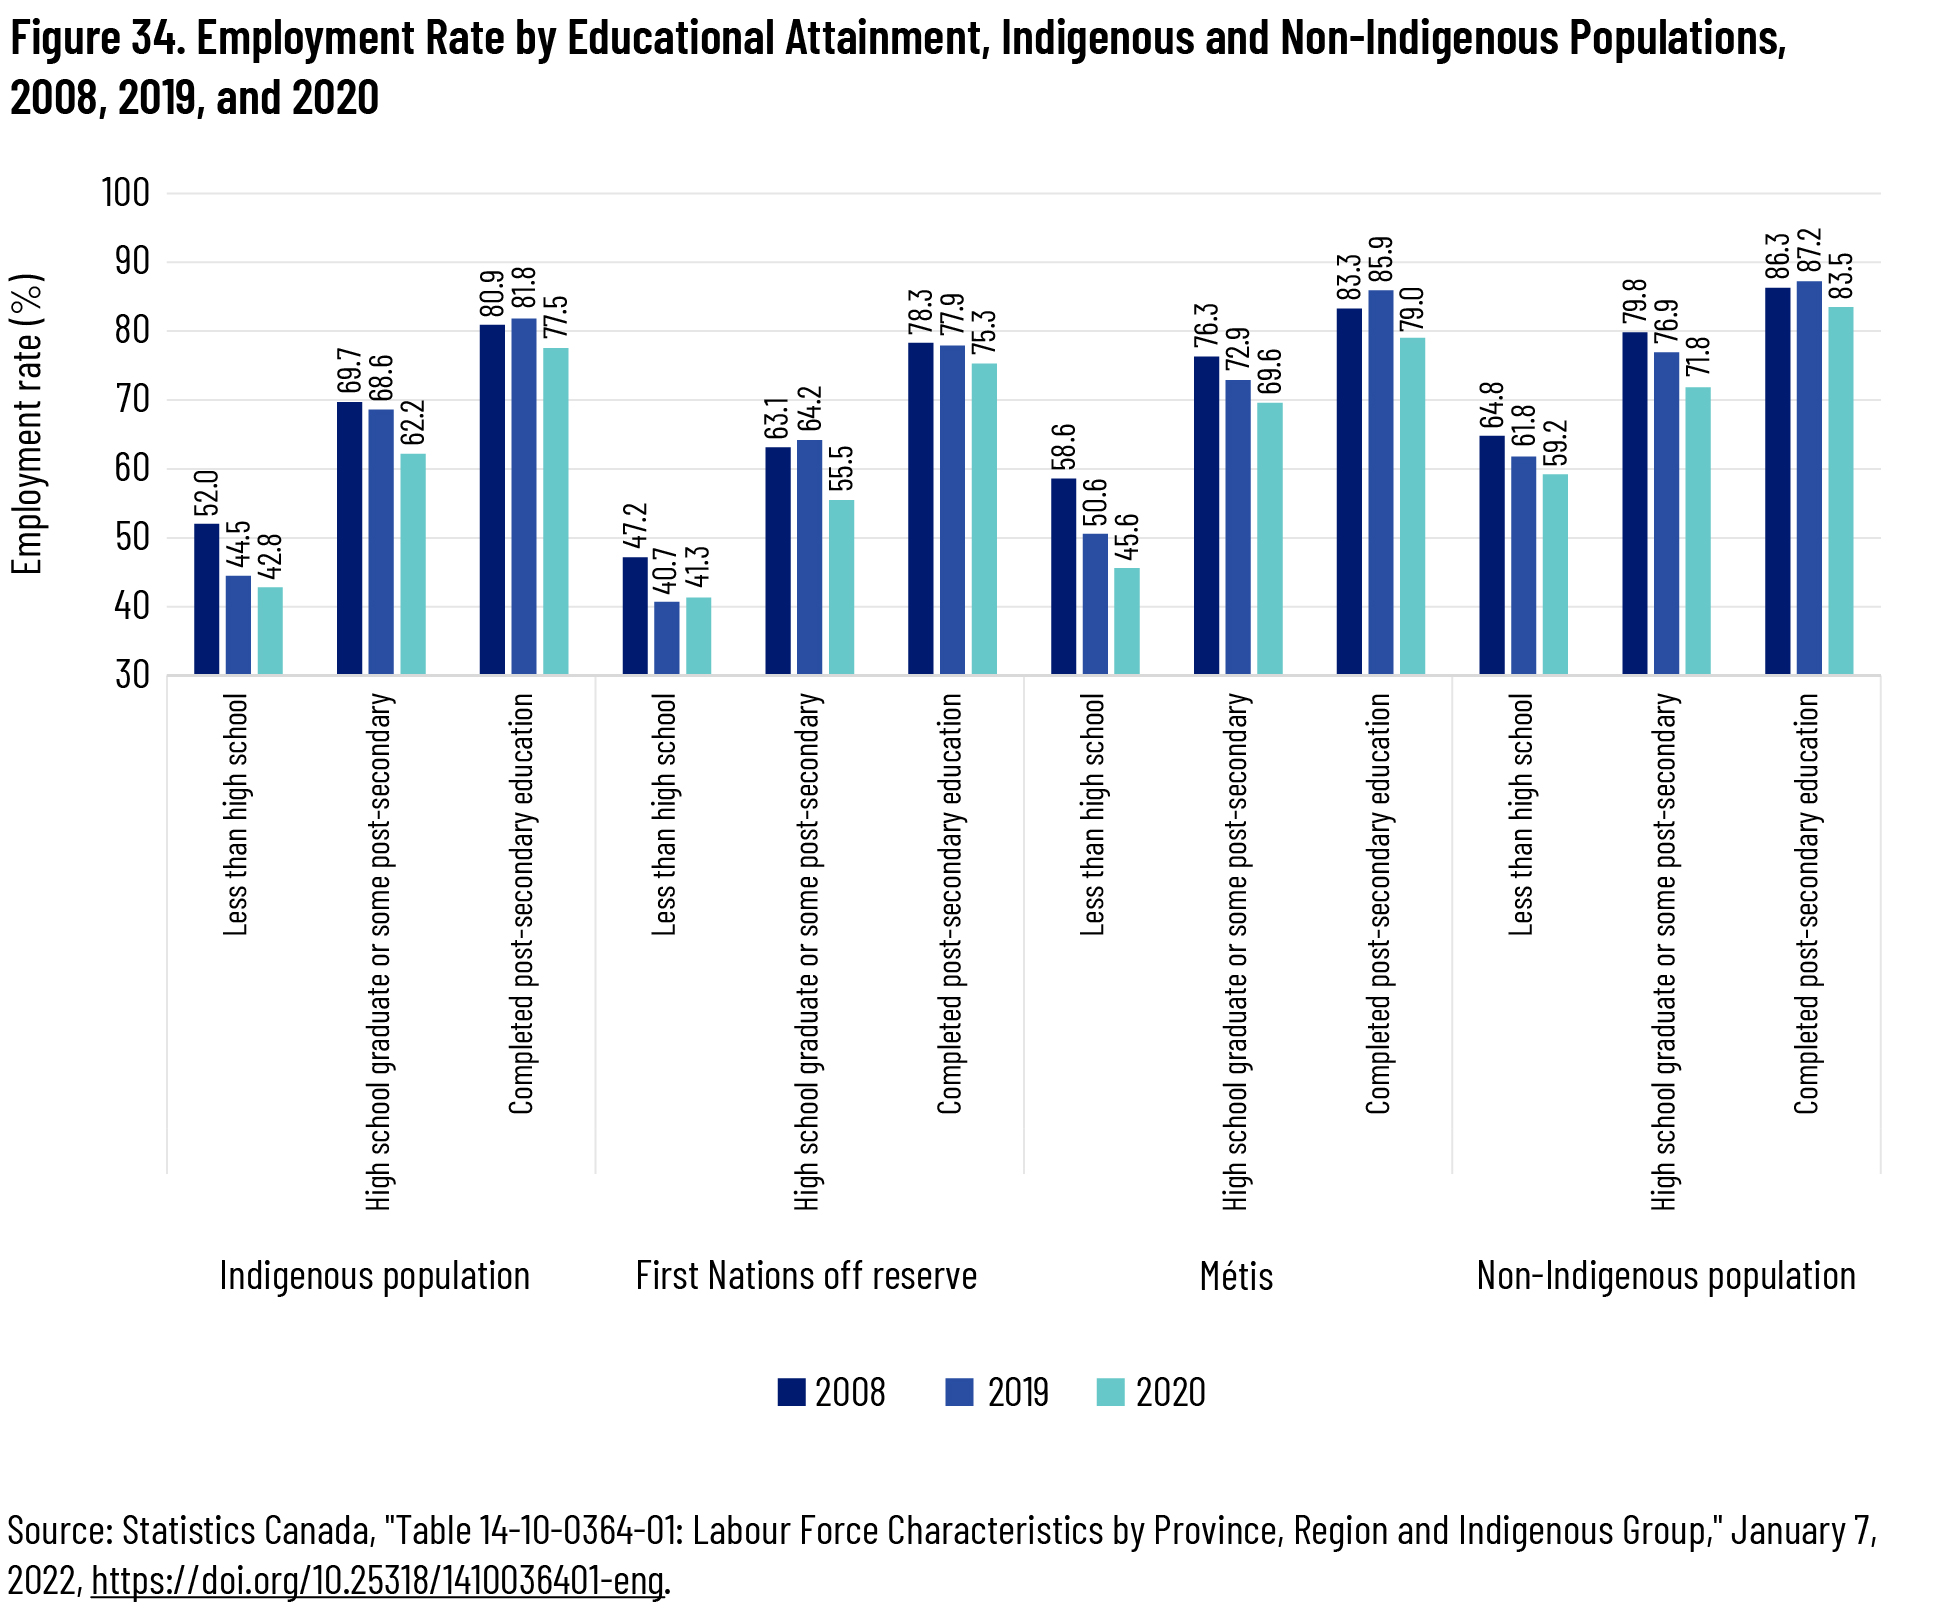 Figure 34. Employment Rate by Educational Attainment, Indigenous and Non-Indigenous Populations, 2008, 2019, and 2020